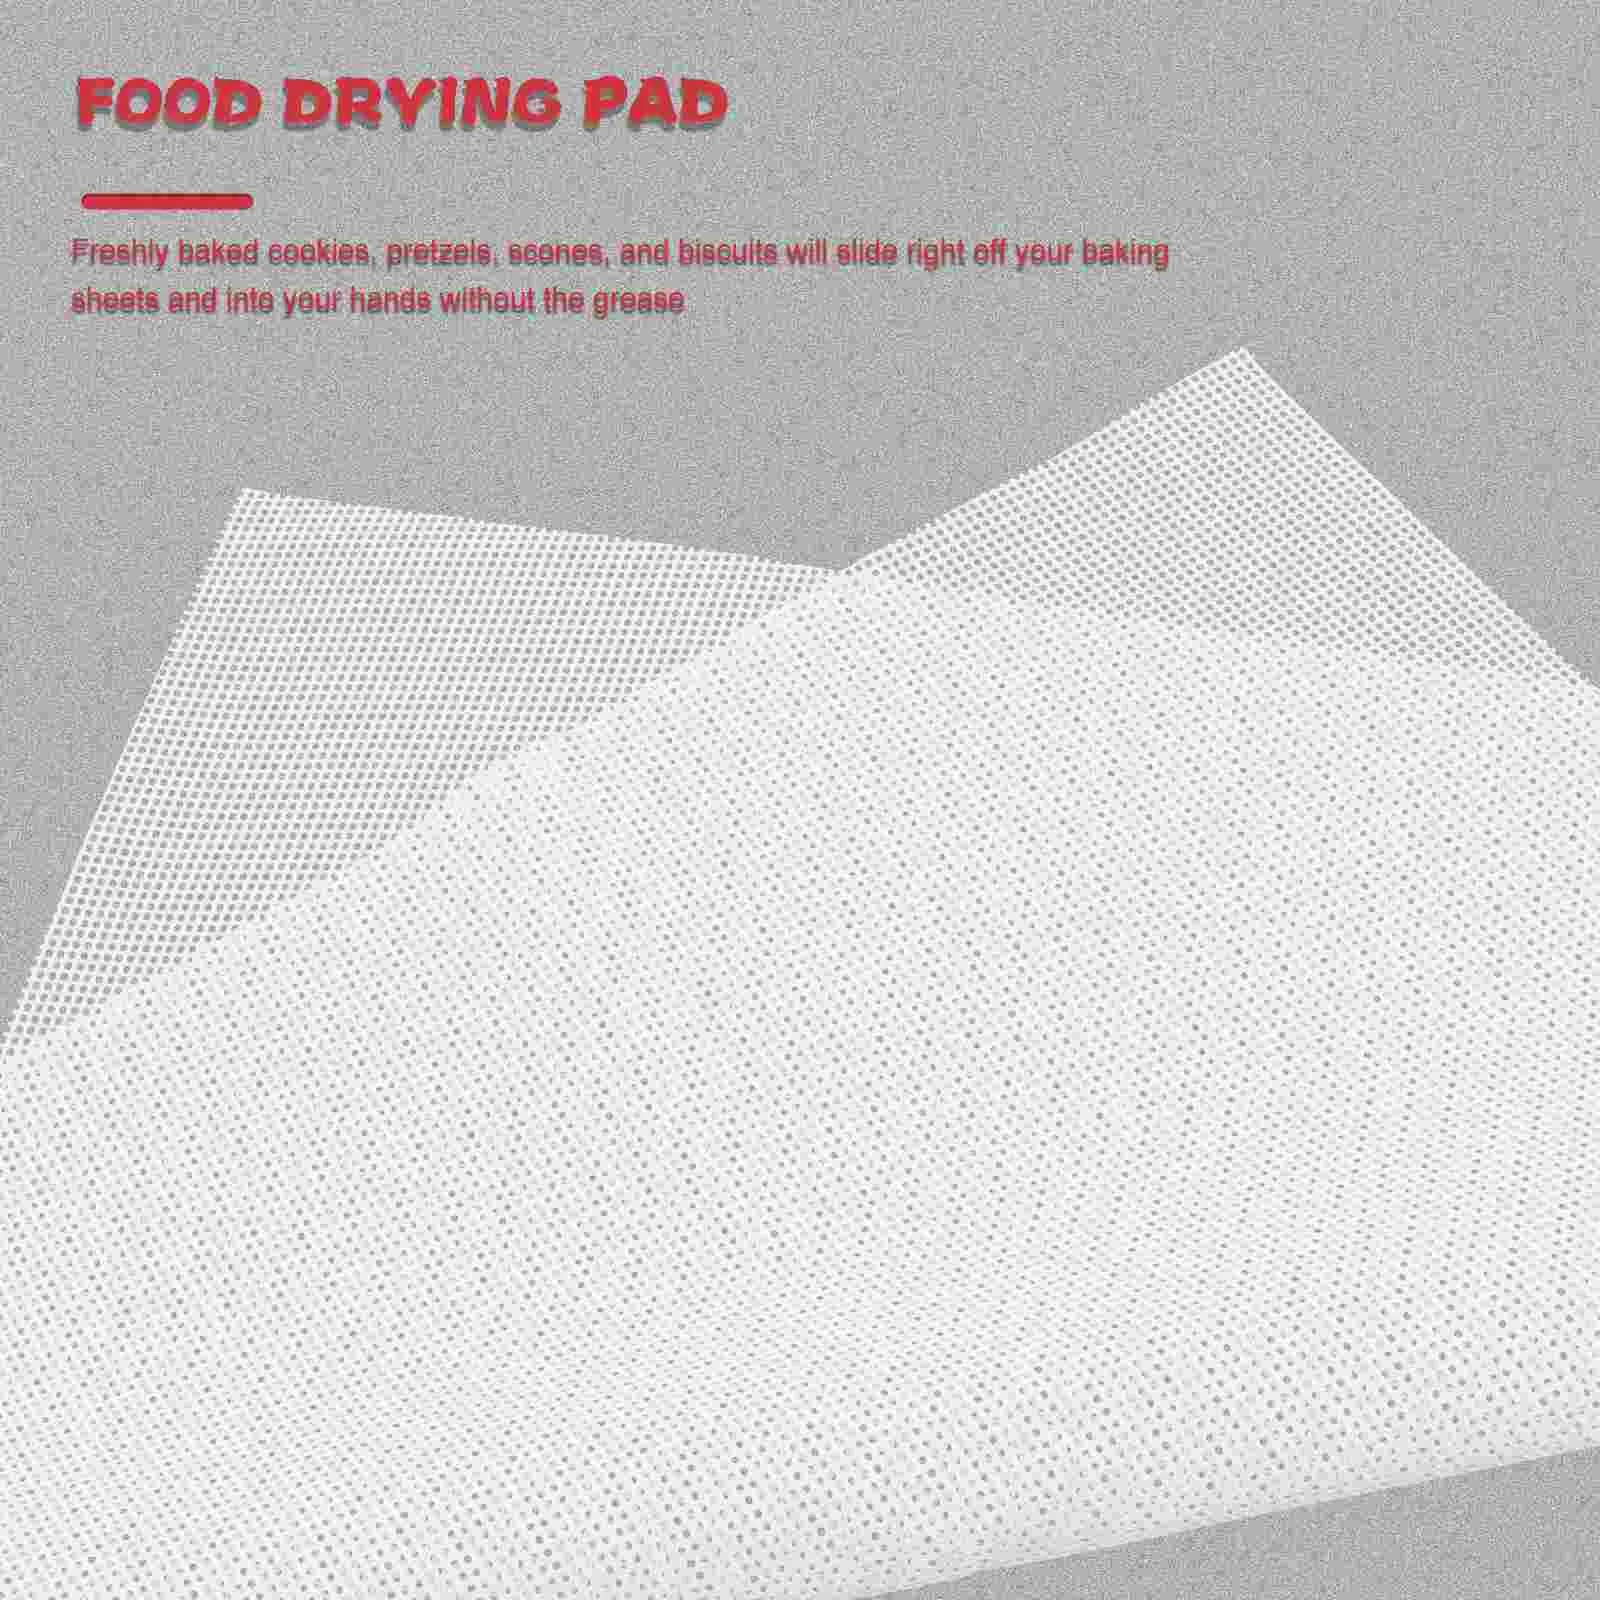 5 Pcs Silicone Tray Dryer Special Mat Dehydrator Sheets Butcher Shop 40X40X0.1cm Pads White Silica Gel images - 6